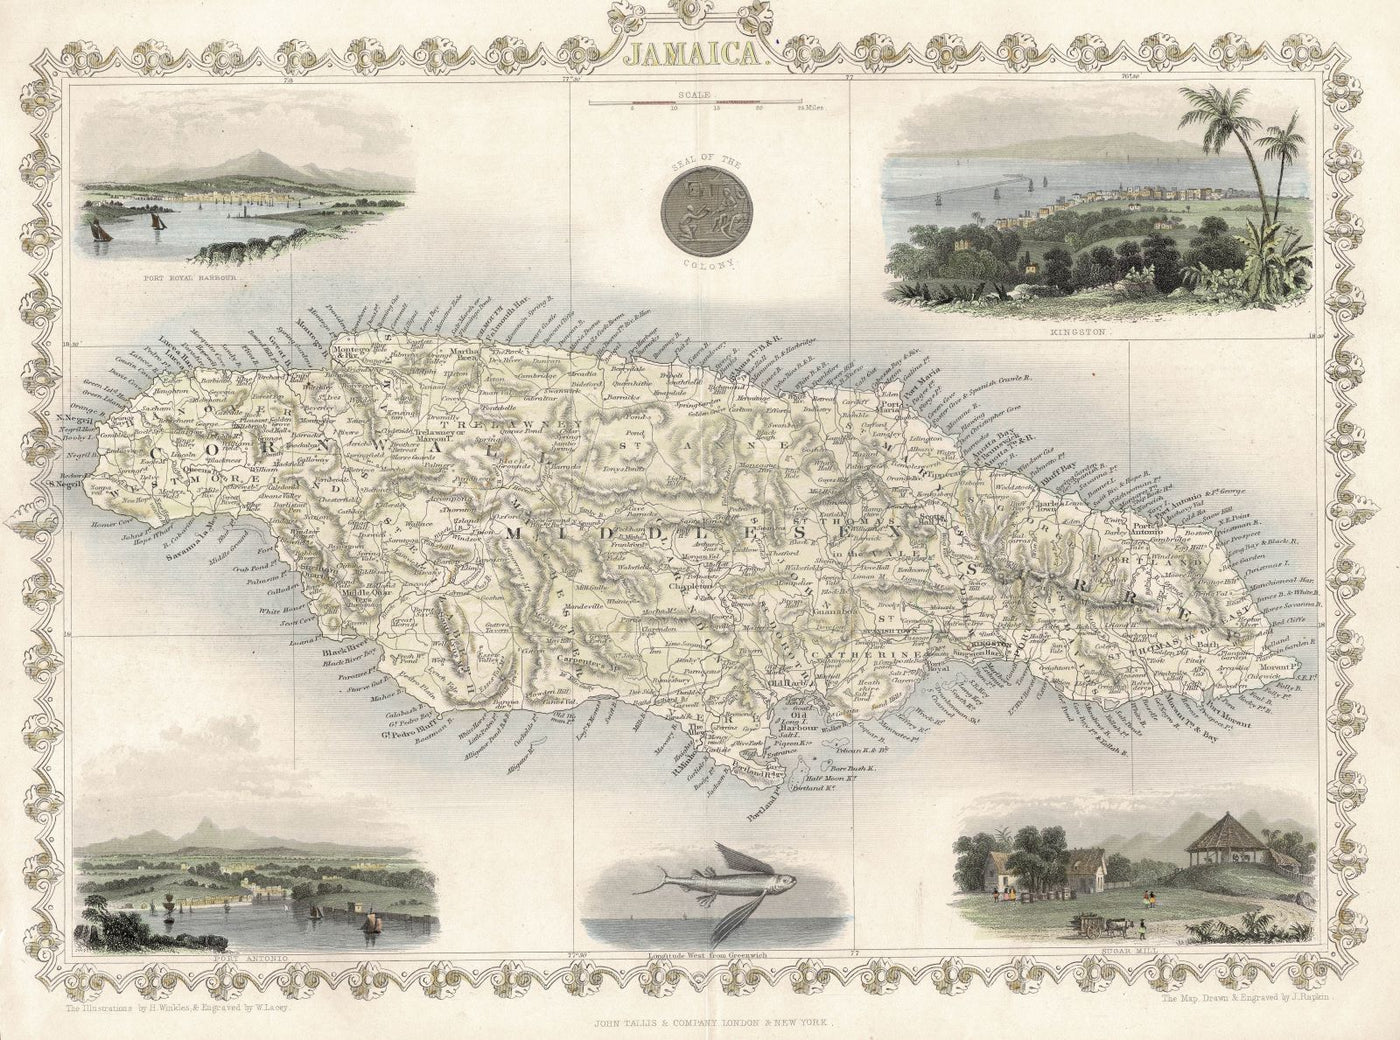 Jamaica original antique map by John Tallis published in 1851